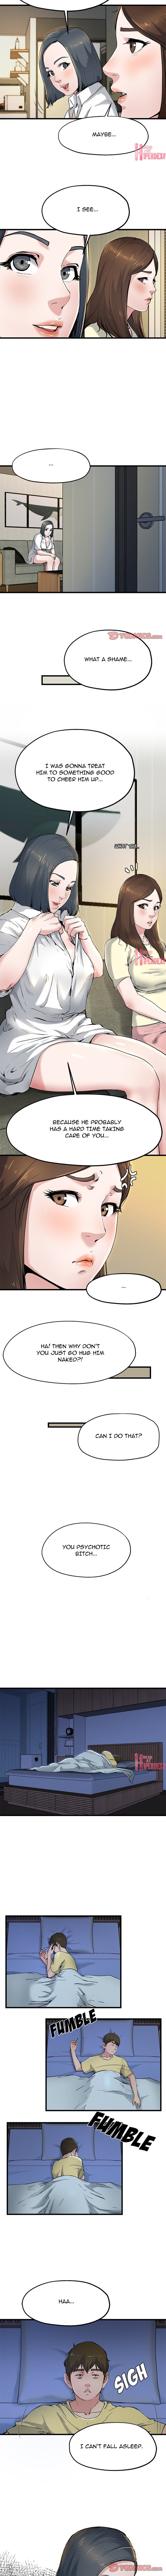 My Memory of You - Chapter 10 Page 2